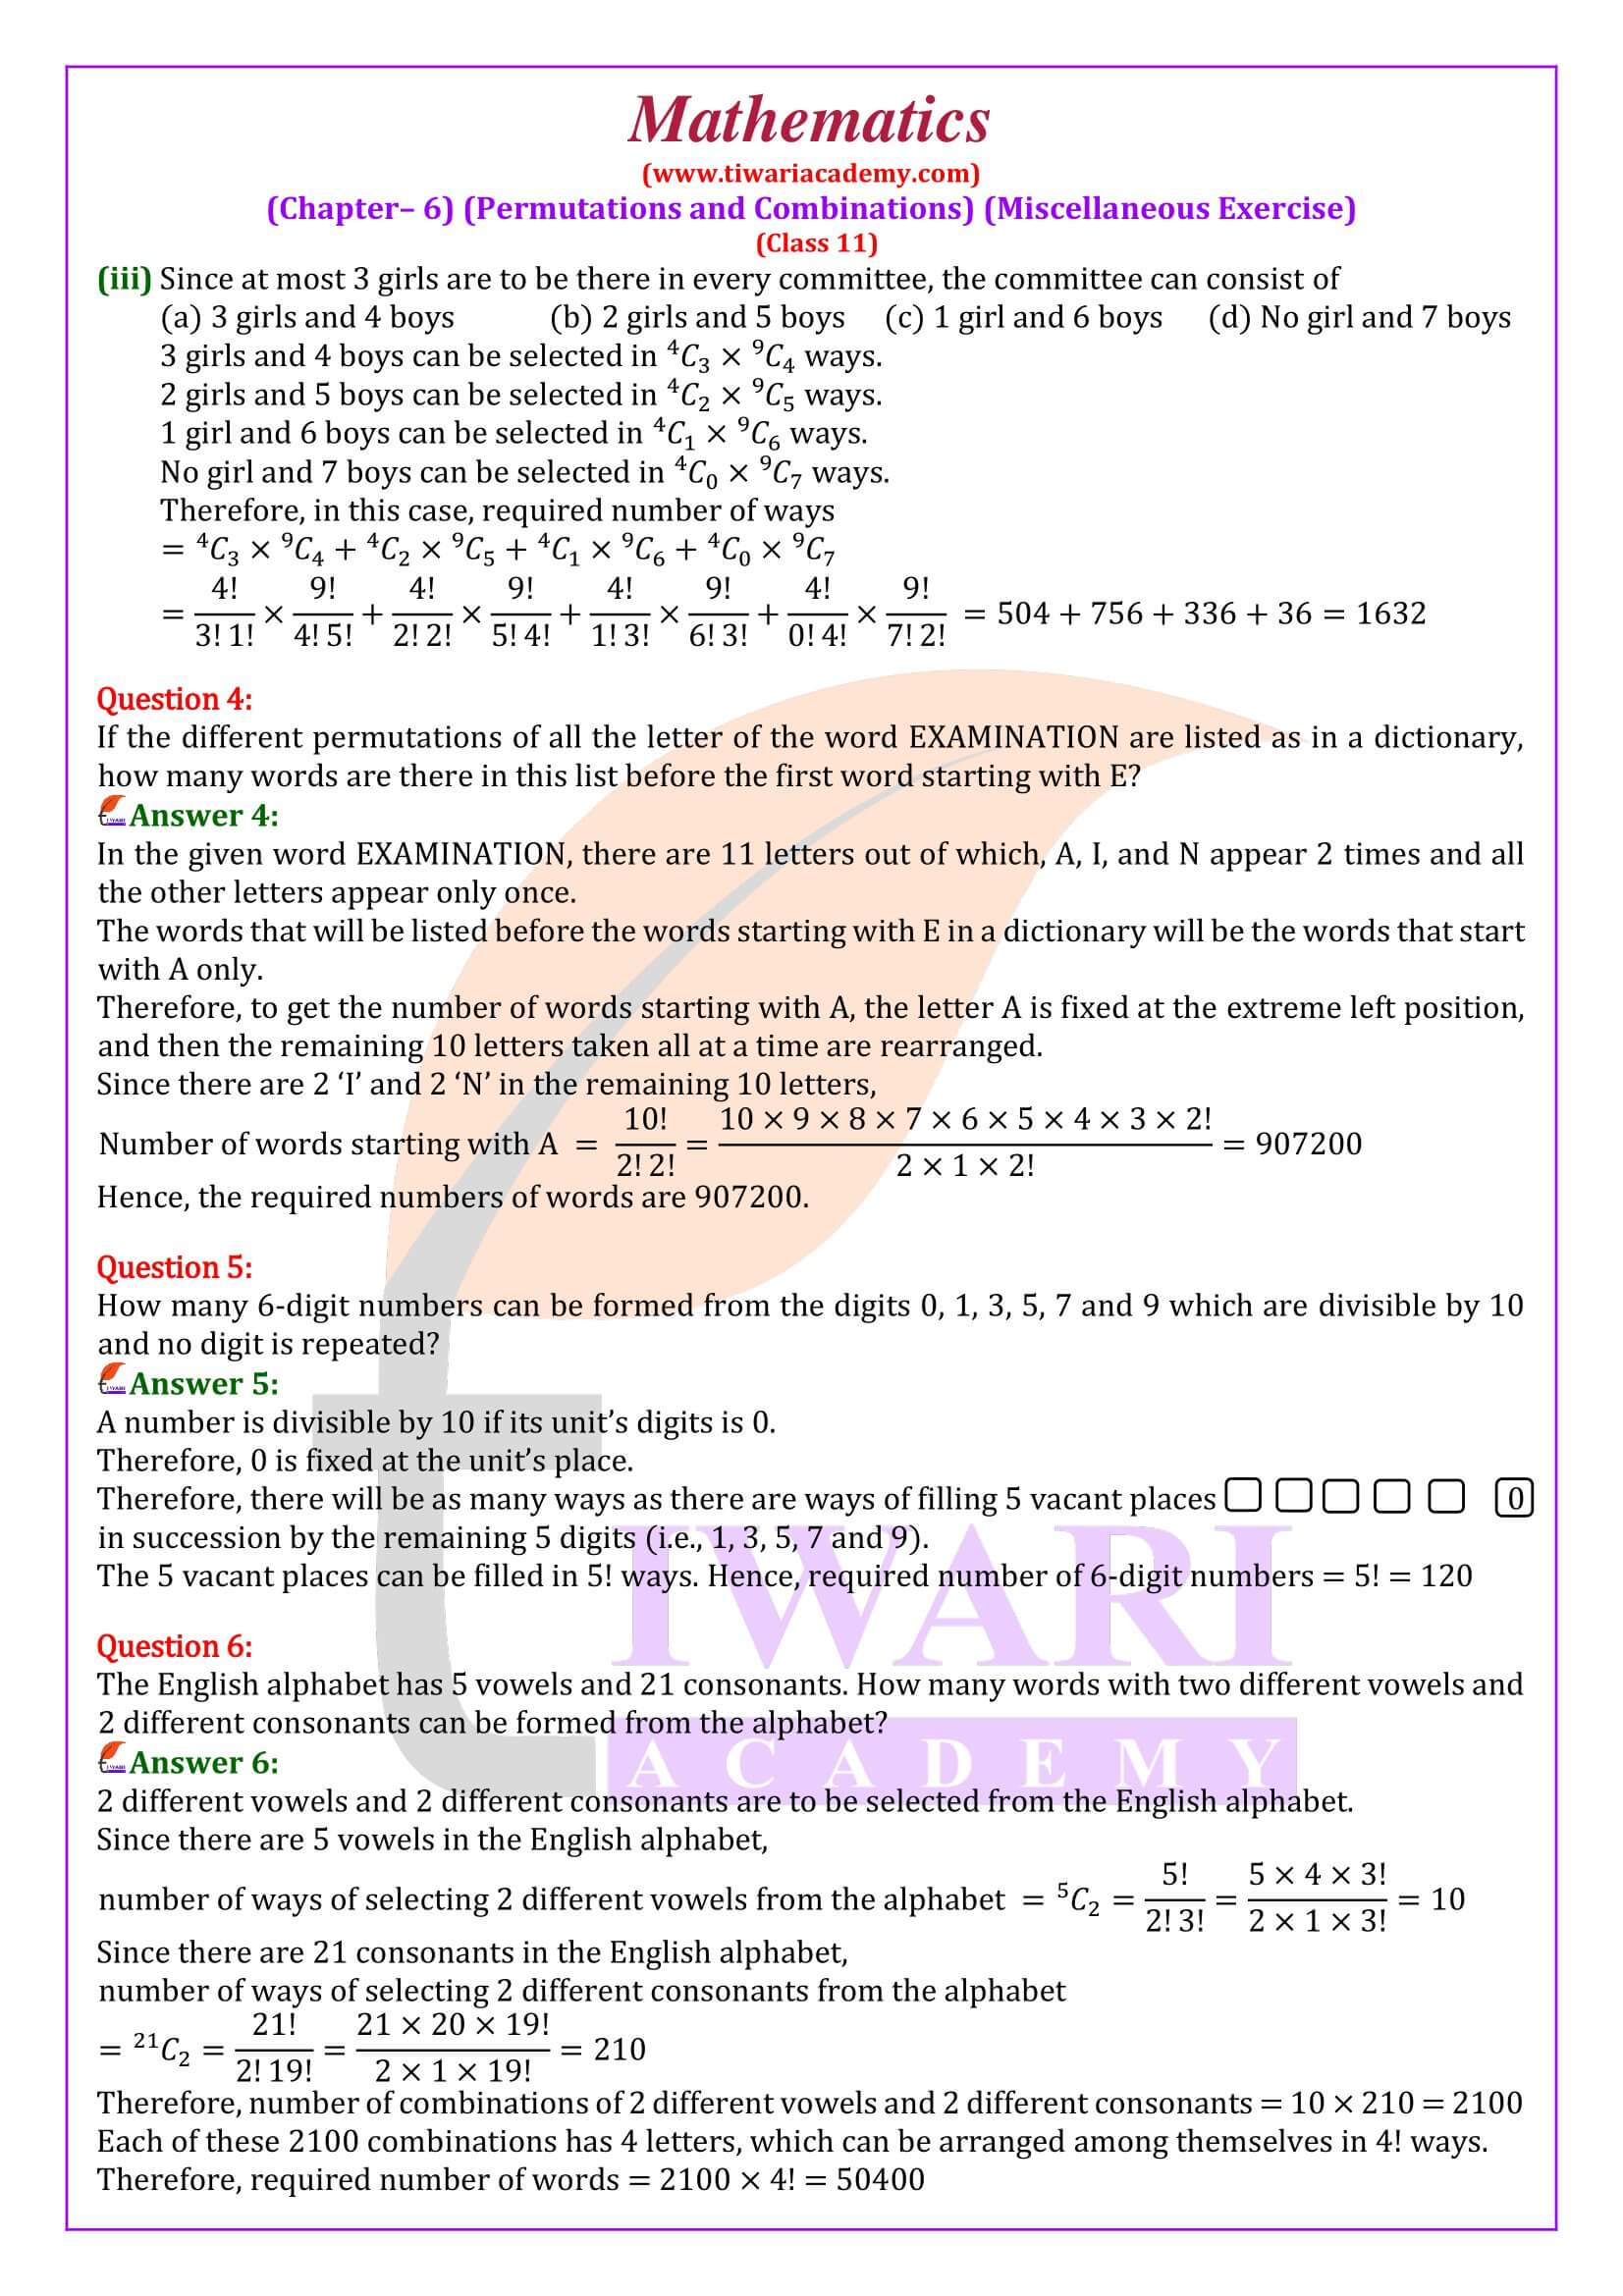 Class 11 Maths Chapter 6 Miscellaneous Exercise